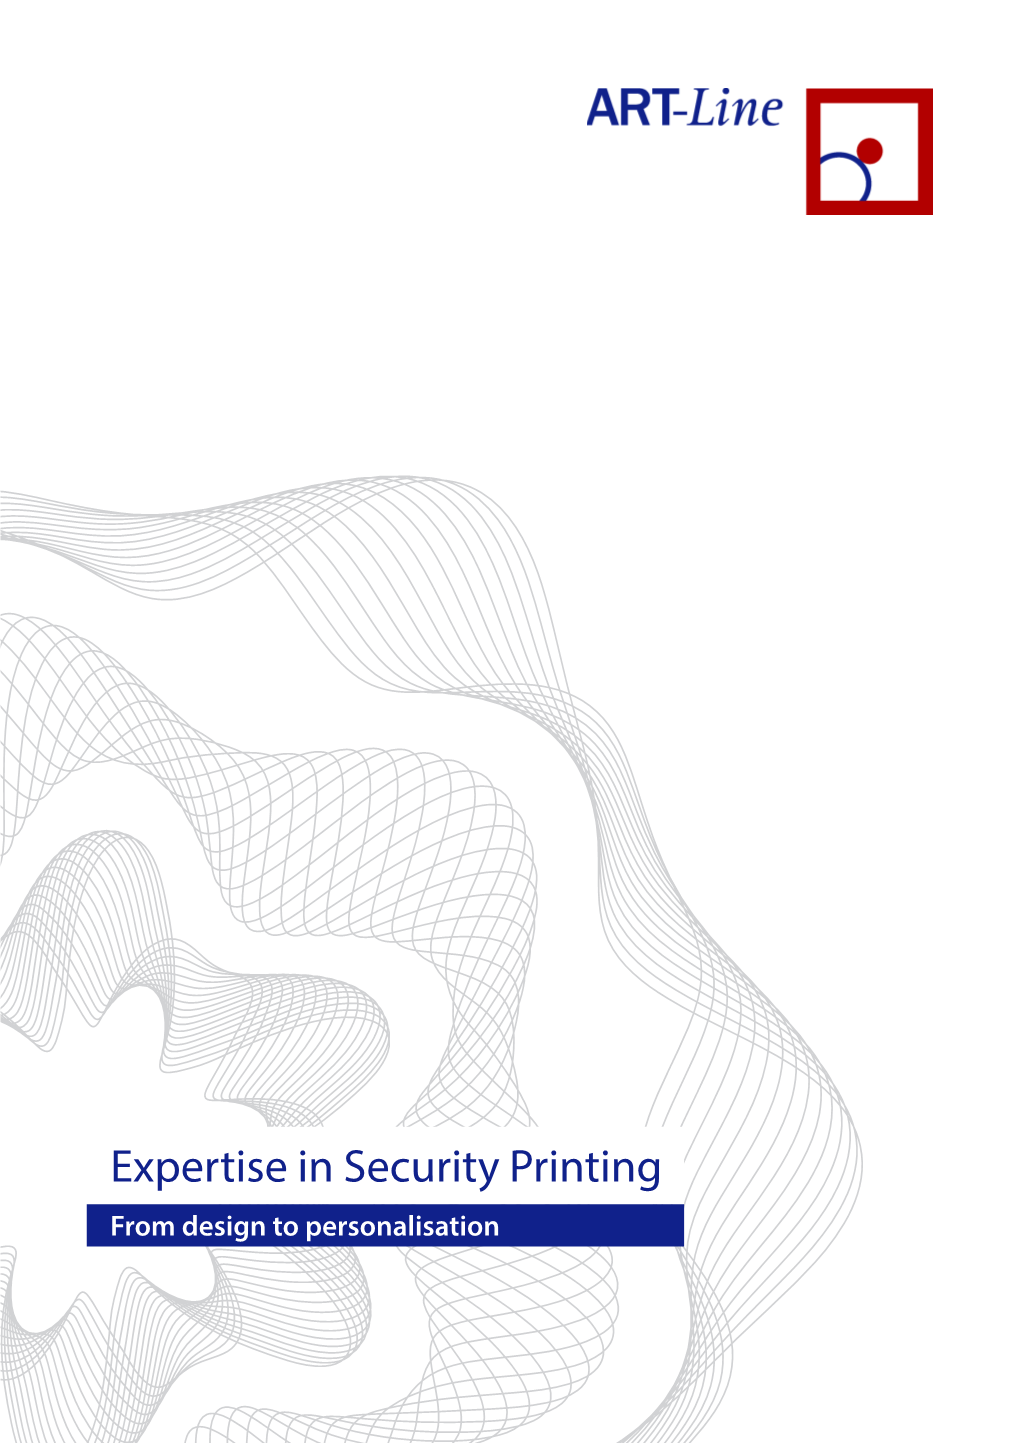 Expertise in Security Printing from Design to Personalisation Who We Are and What We Do